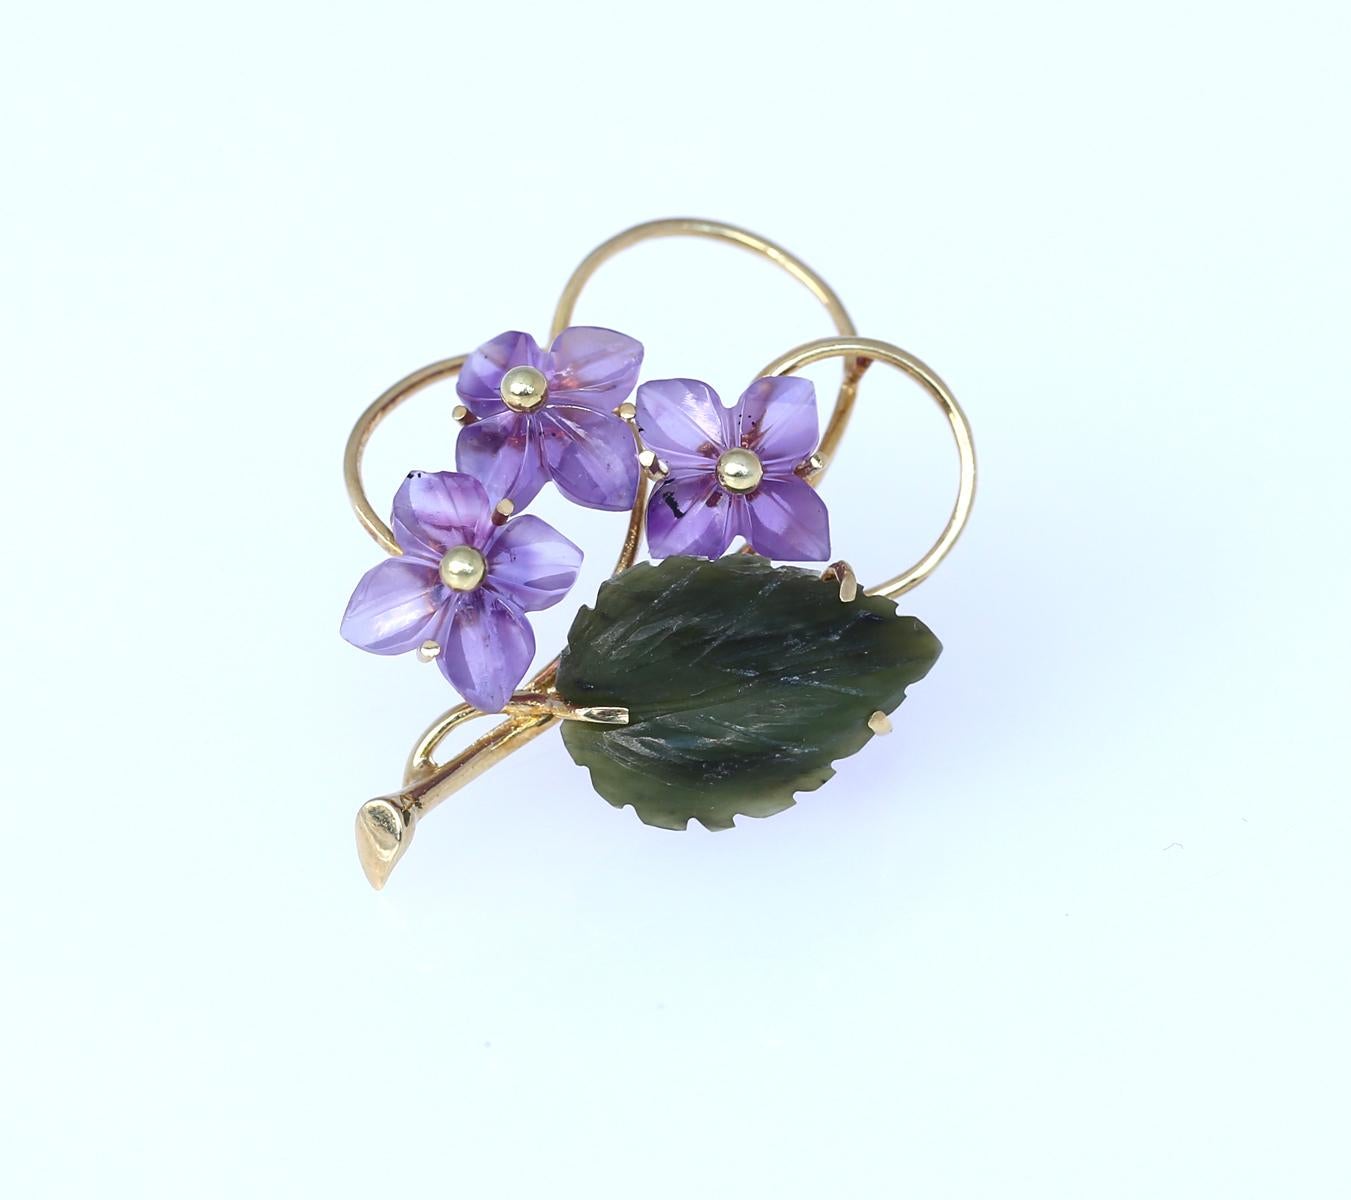 Violet flowers brooch comprising: Amethyst, Jade (jadeite). Yellow gold. Three engraved amethyst flowers with a green leaf made of jadeite. 

Once it was common to communicate a message via pin or brooch. Nowadays this art is lost, but we can surely